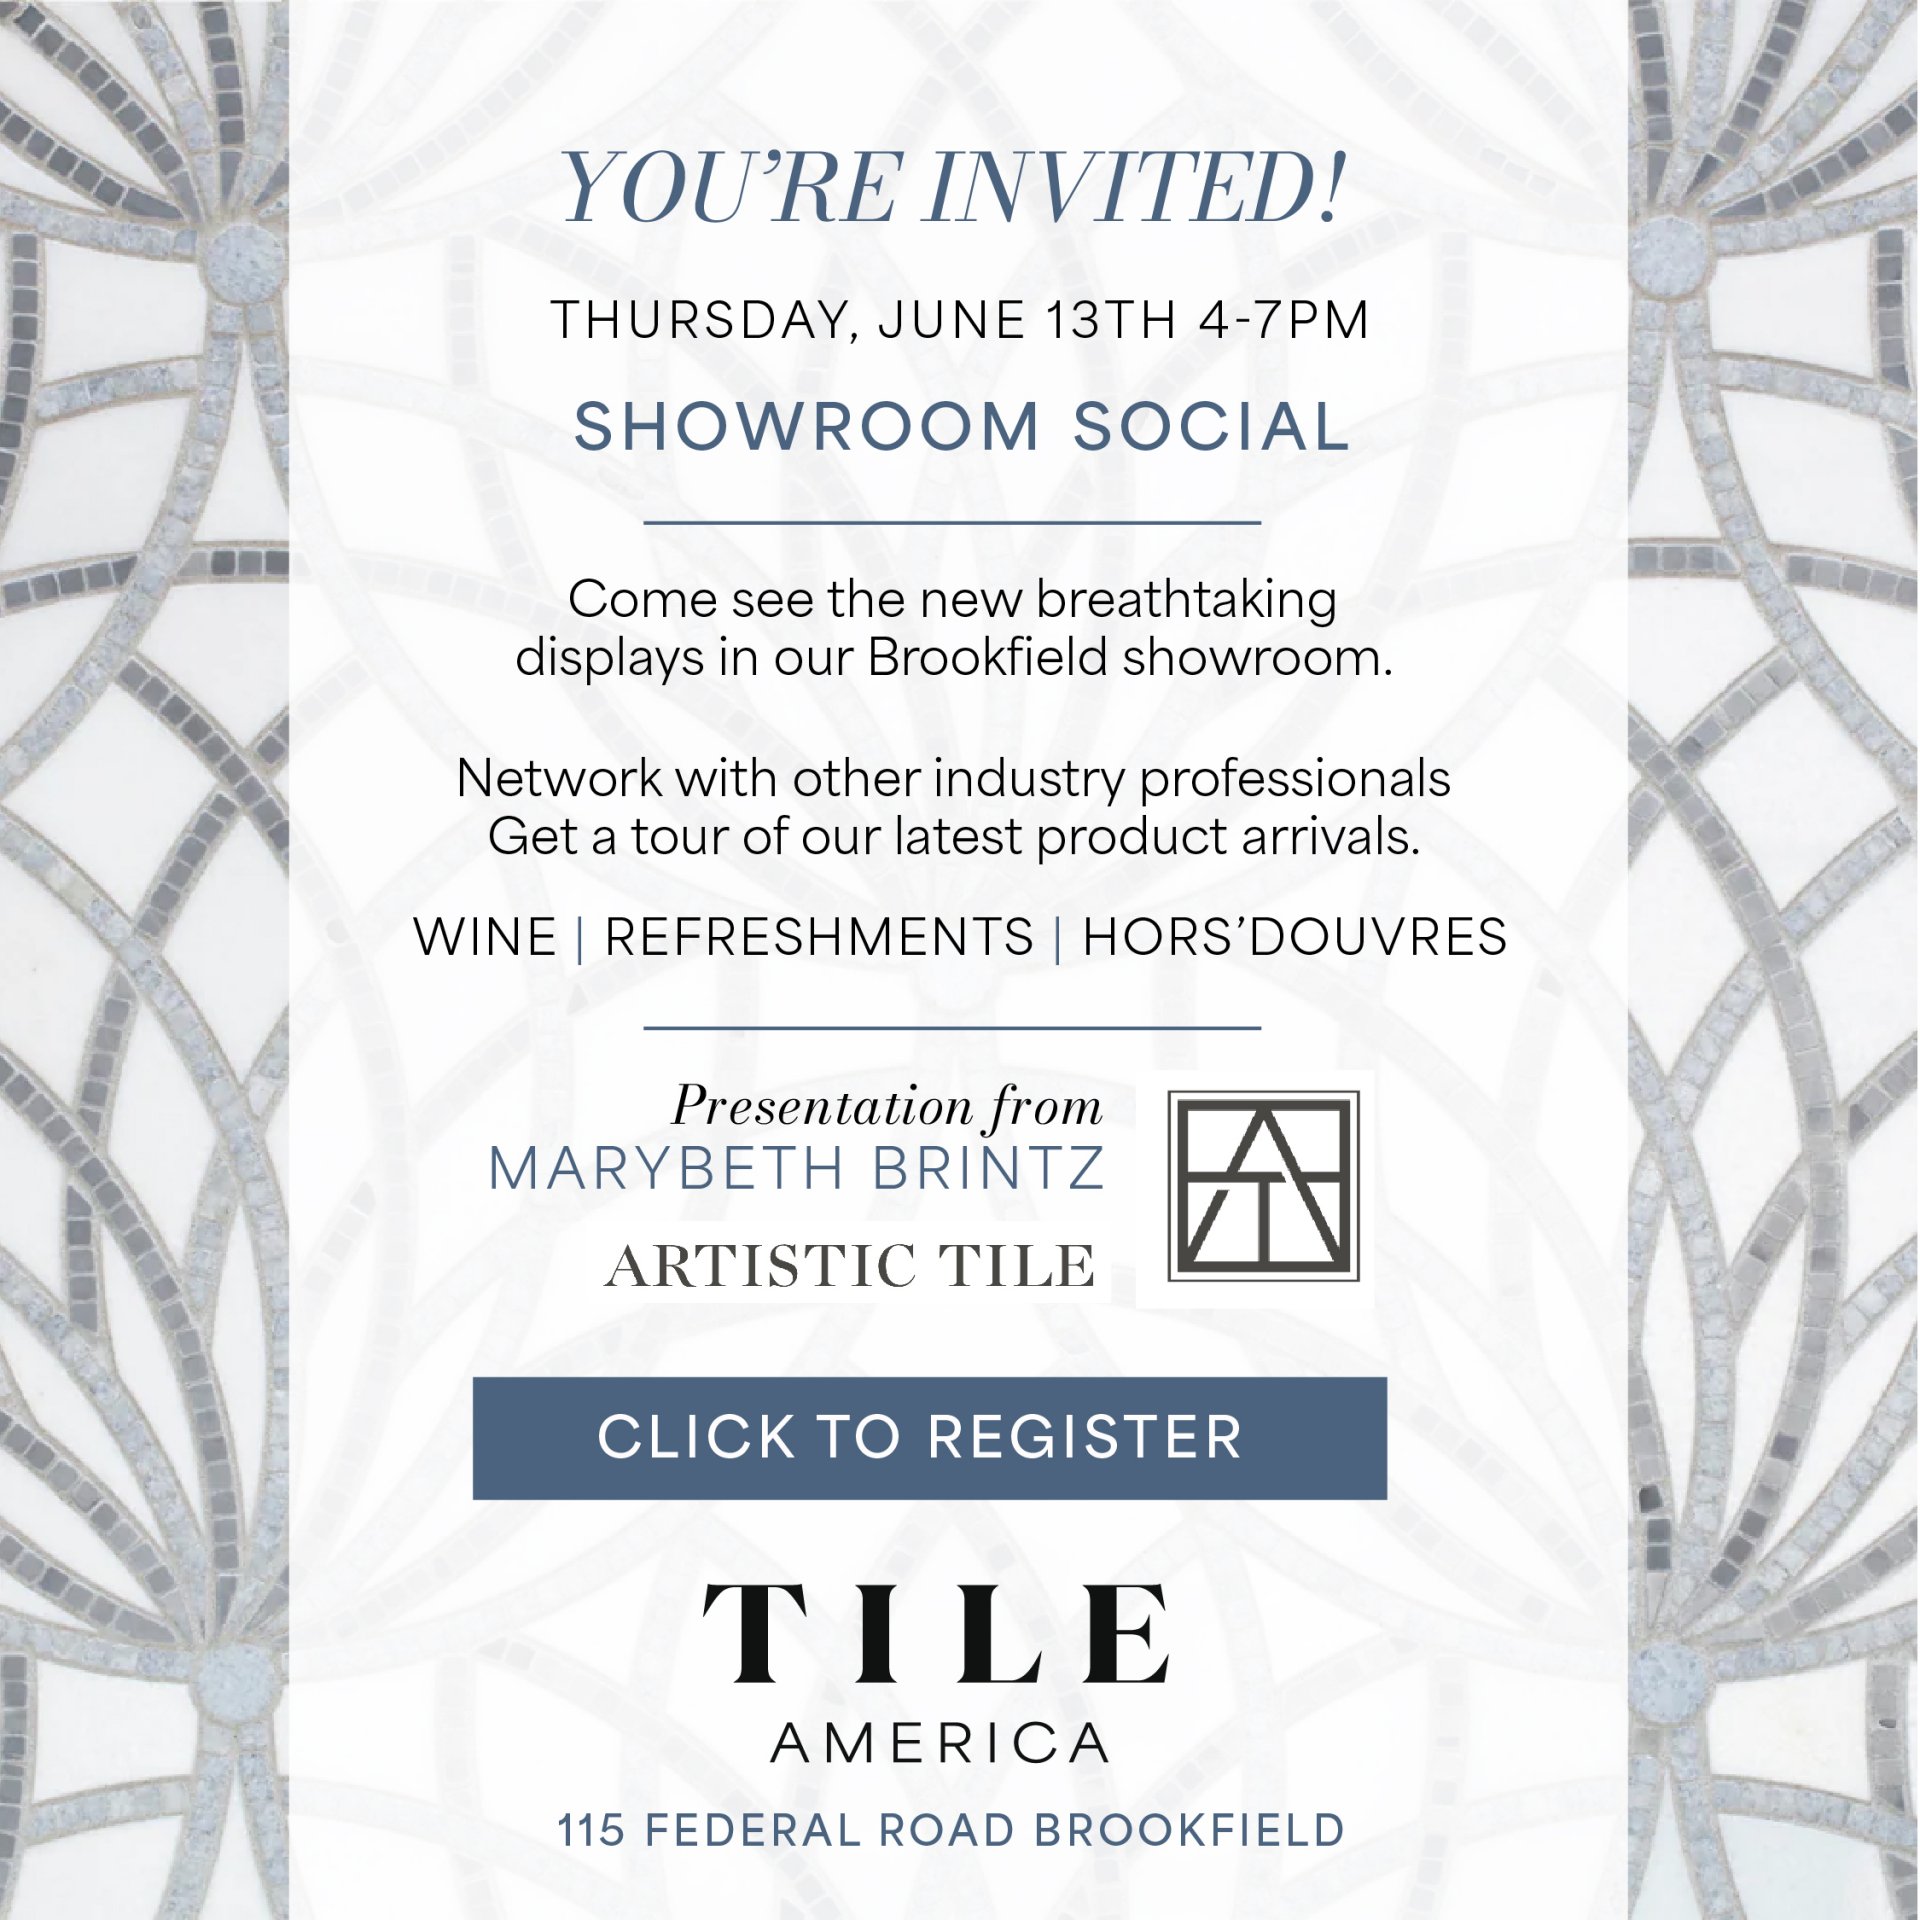 You are invited!  Brookfield Showroom Social